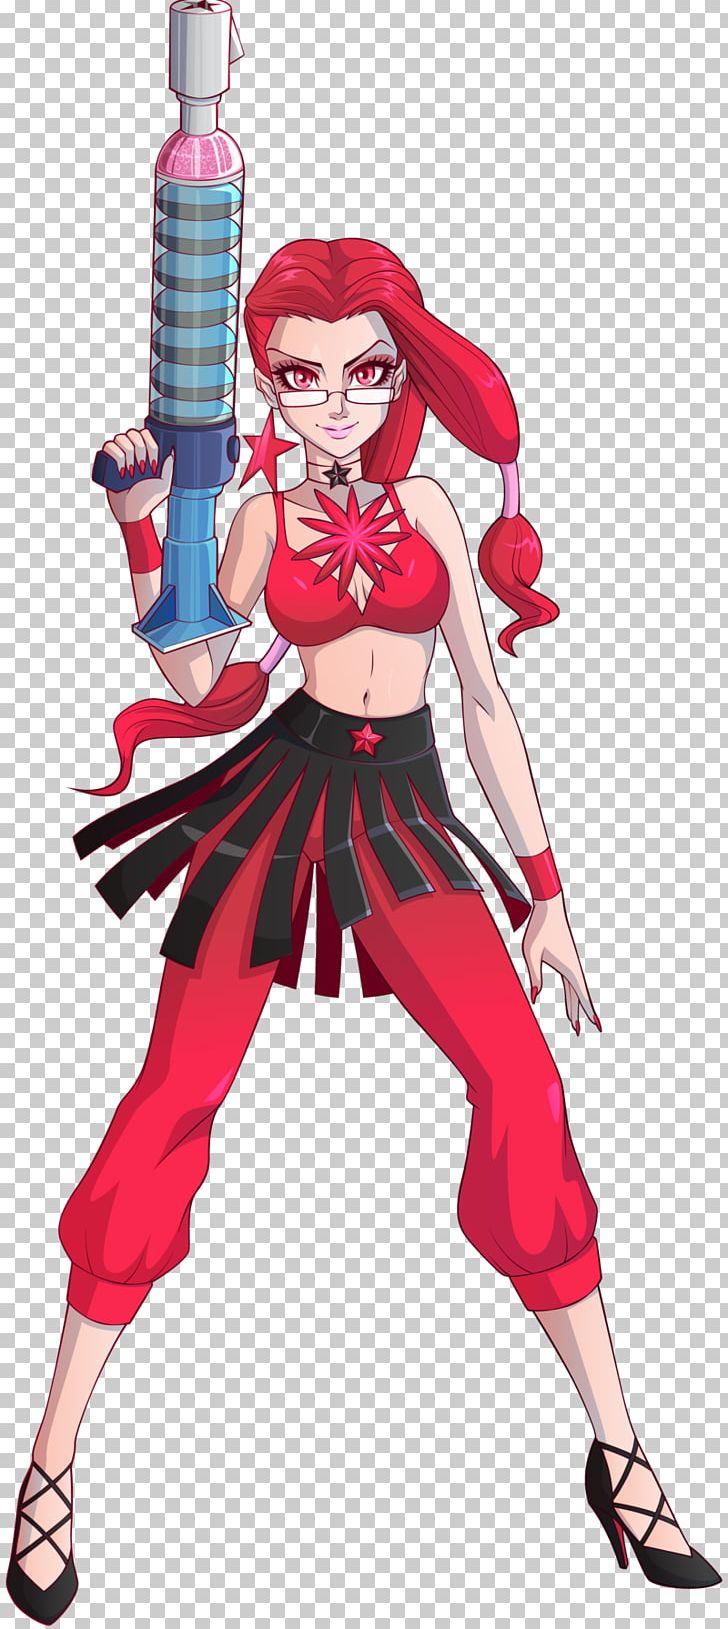 Eudial Villain Sailor Moon Art Character PNG, Clipart, Anime, Art, Cartoon, Character, Costume Free PNG Download